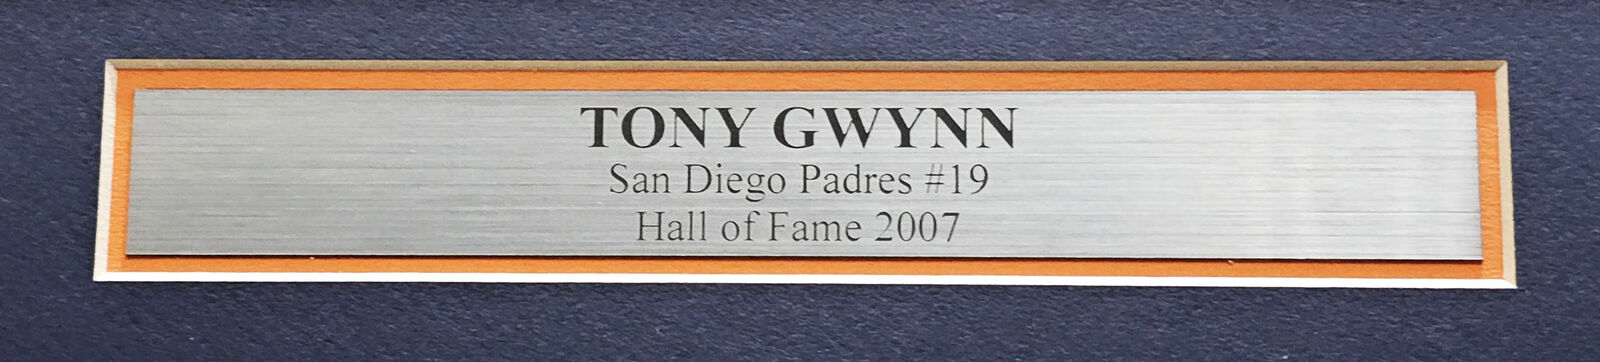 Tony Gwynn Framed Signed Jersey PSA/DNA Autographed San Diego Padres